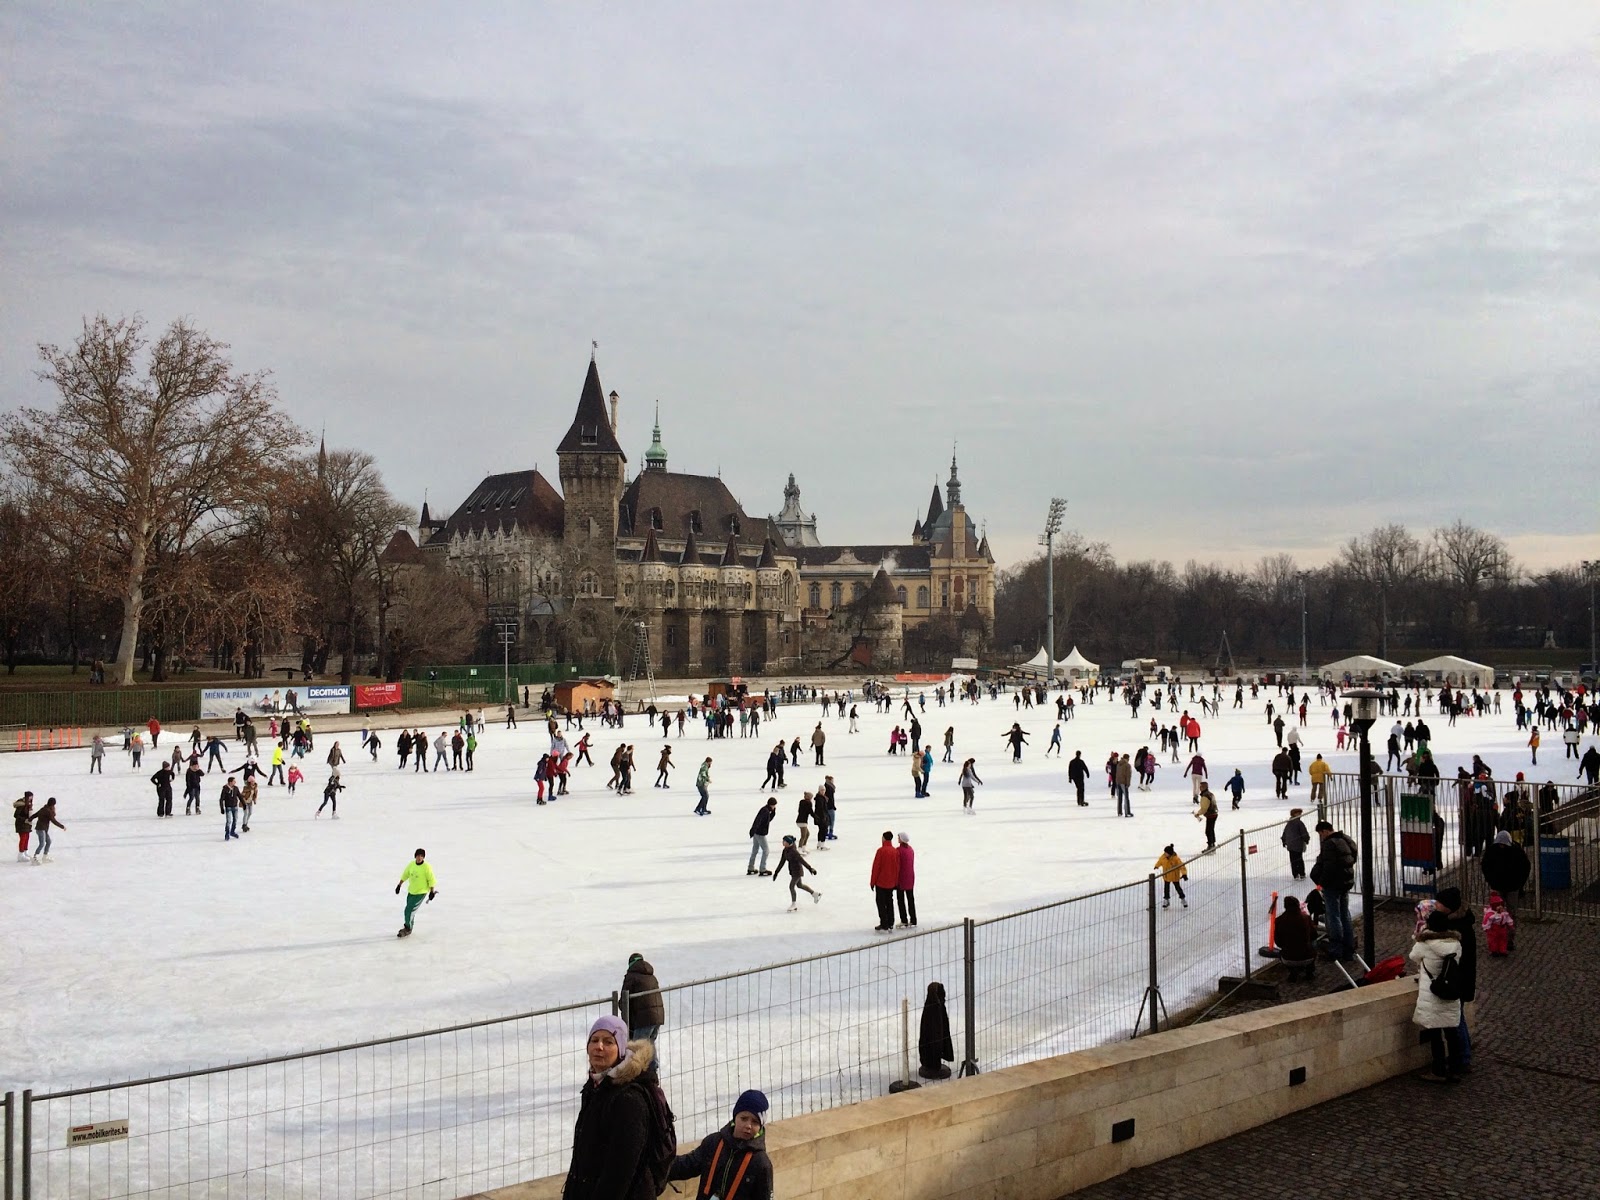 Budapest outdoor ice rink - near Szechenyi thermal spa baths